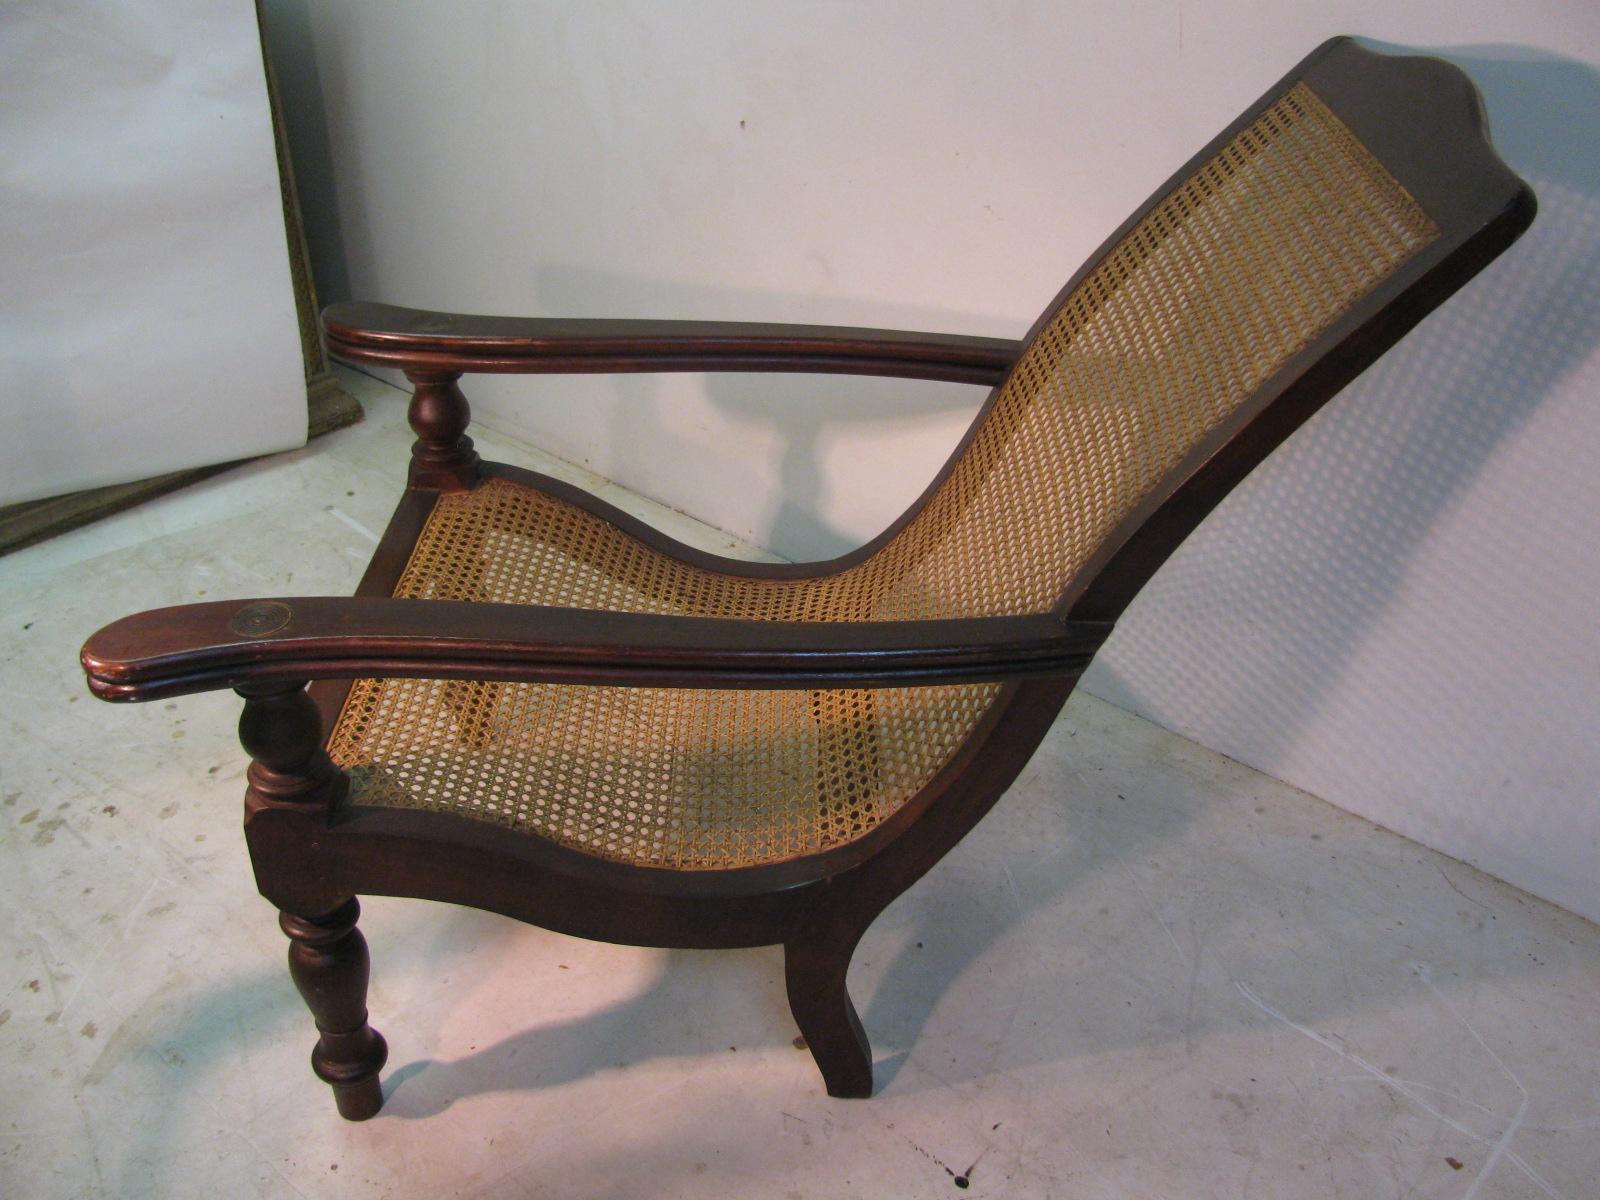 british colonial furniture for sale